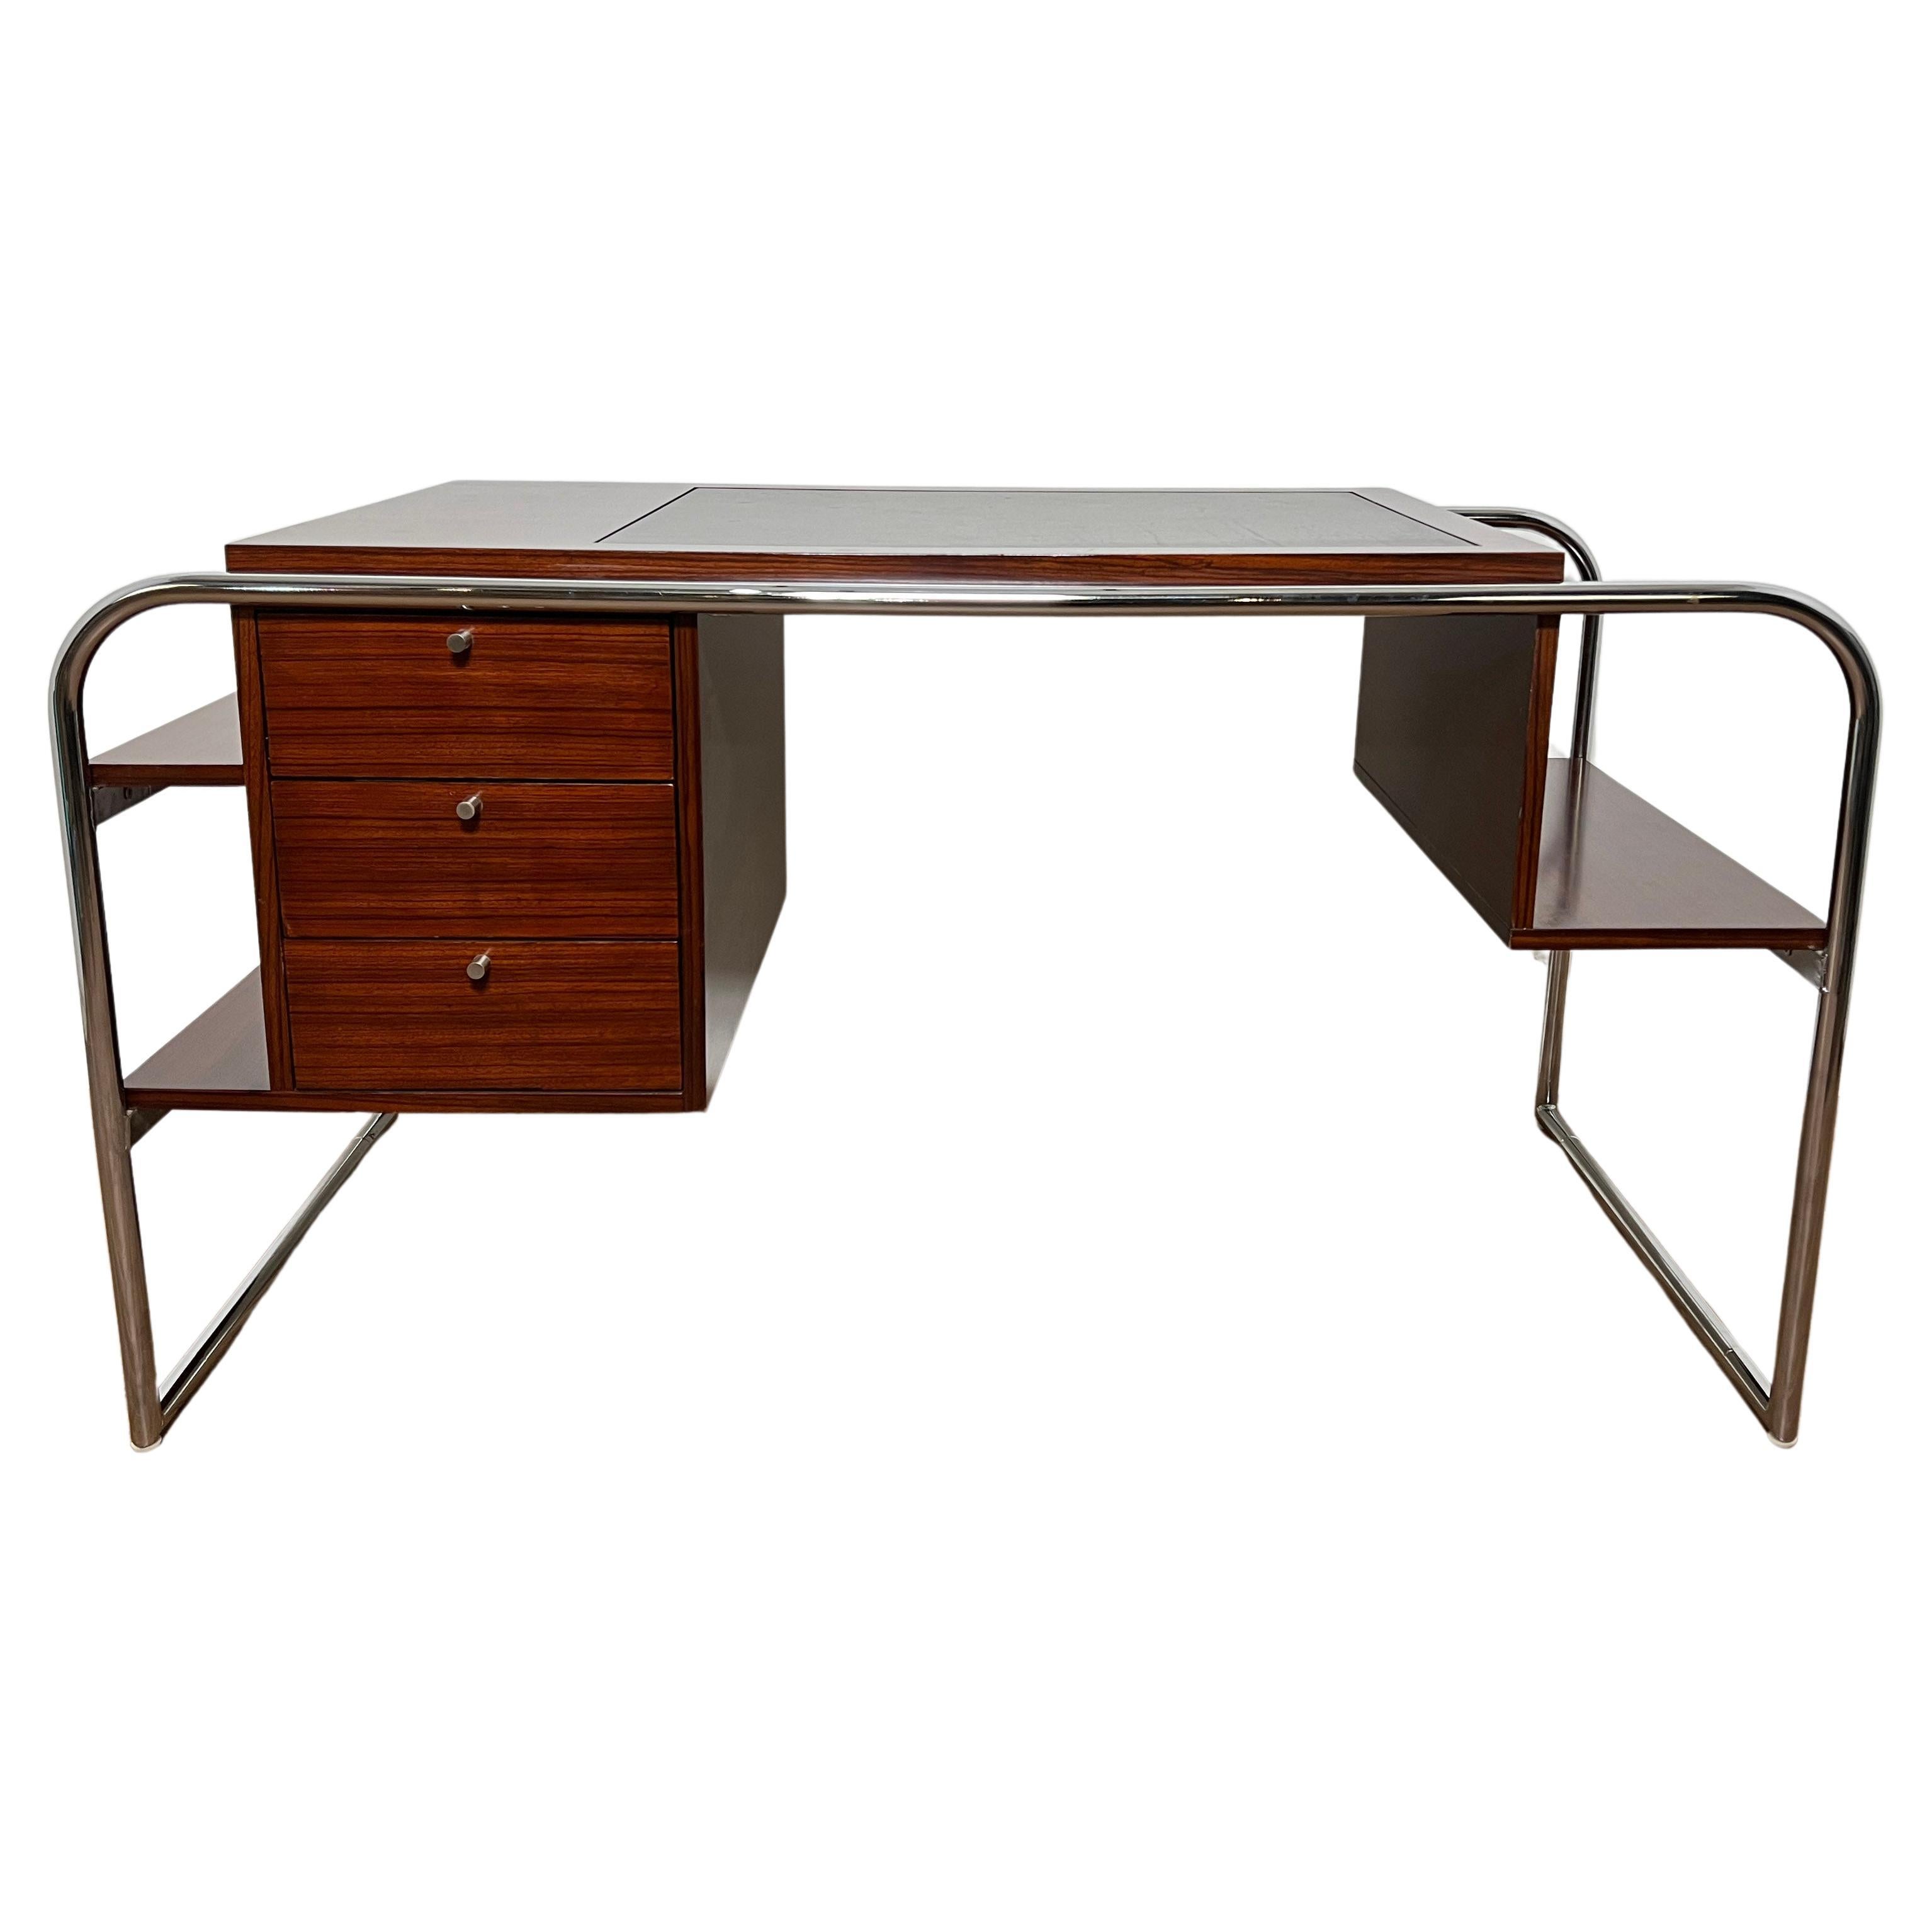 Ralph Lauren Bauhaus Inspired Desk in Rosewood, Chrome and Leather